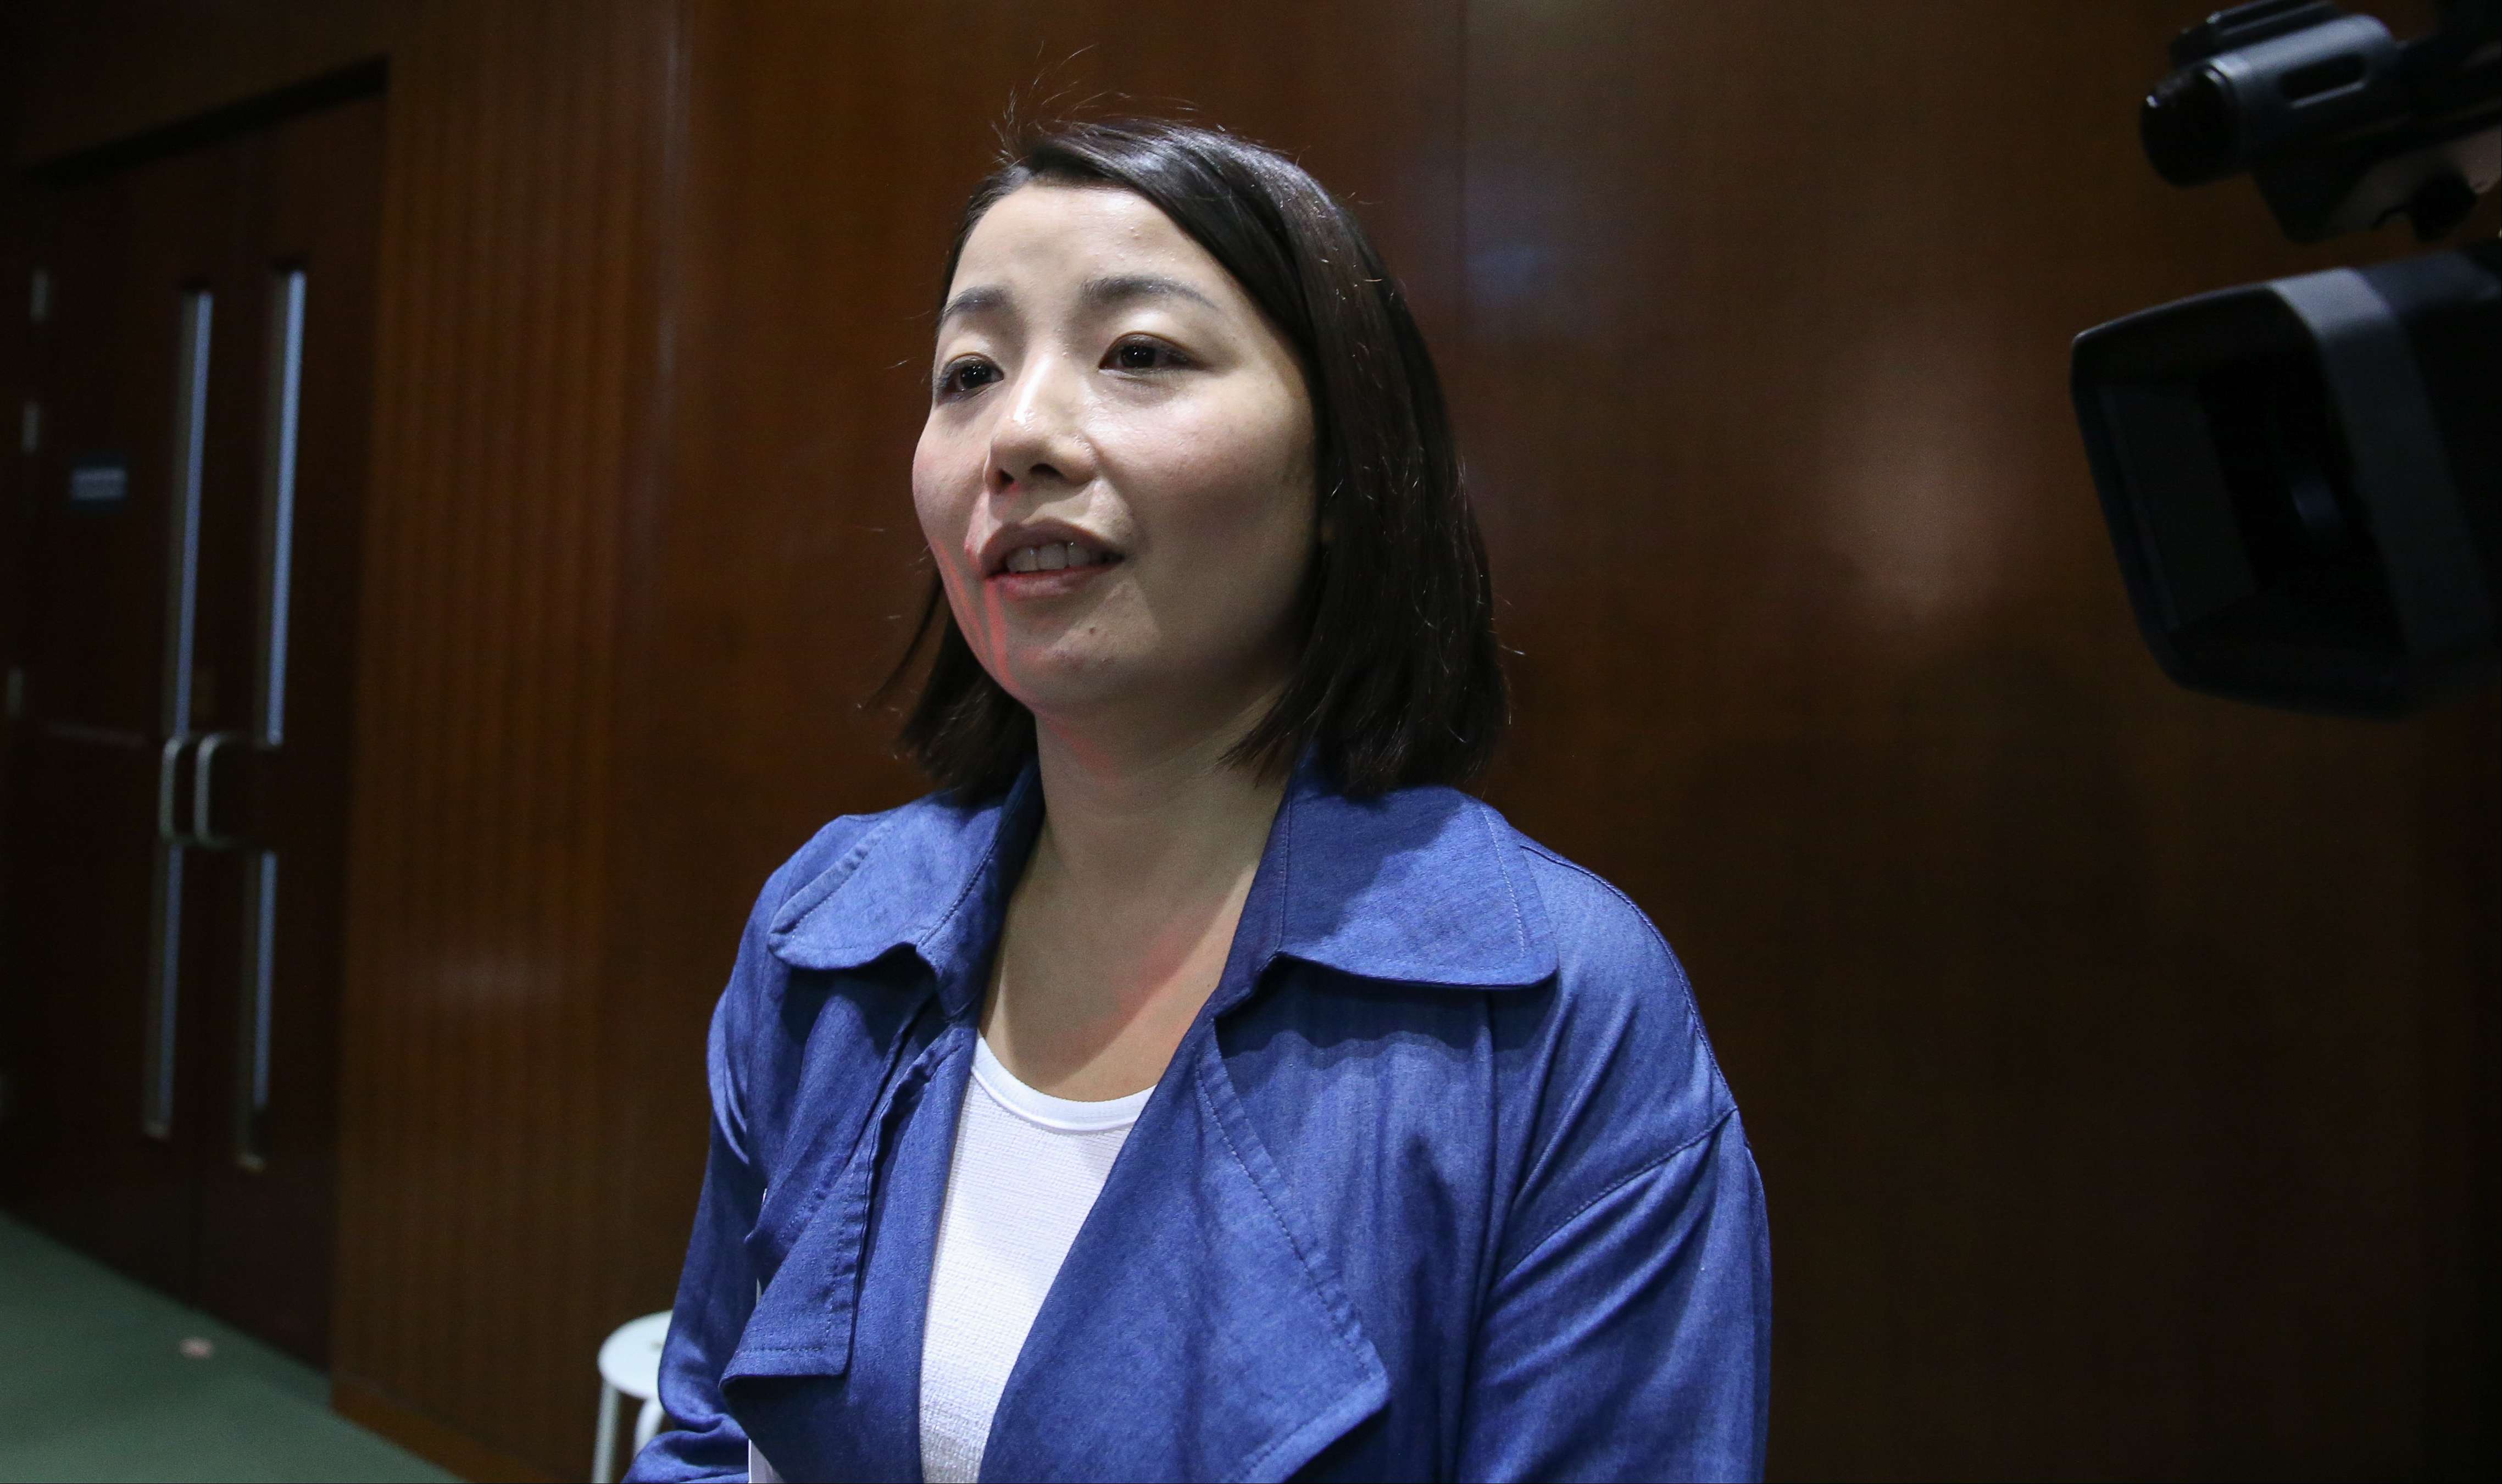 Lau Siu-lai of Democracy Groundwork in the Legco building on Wednesday. Photo: Sam Tsang